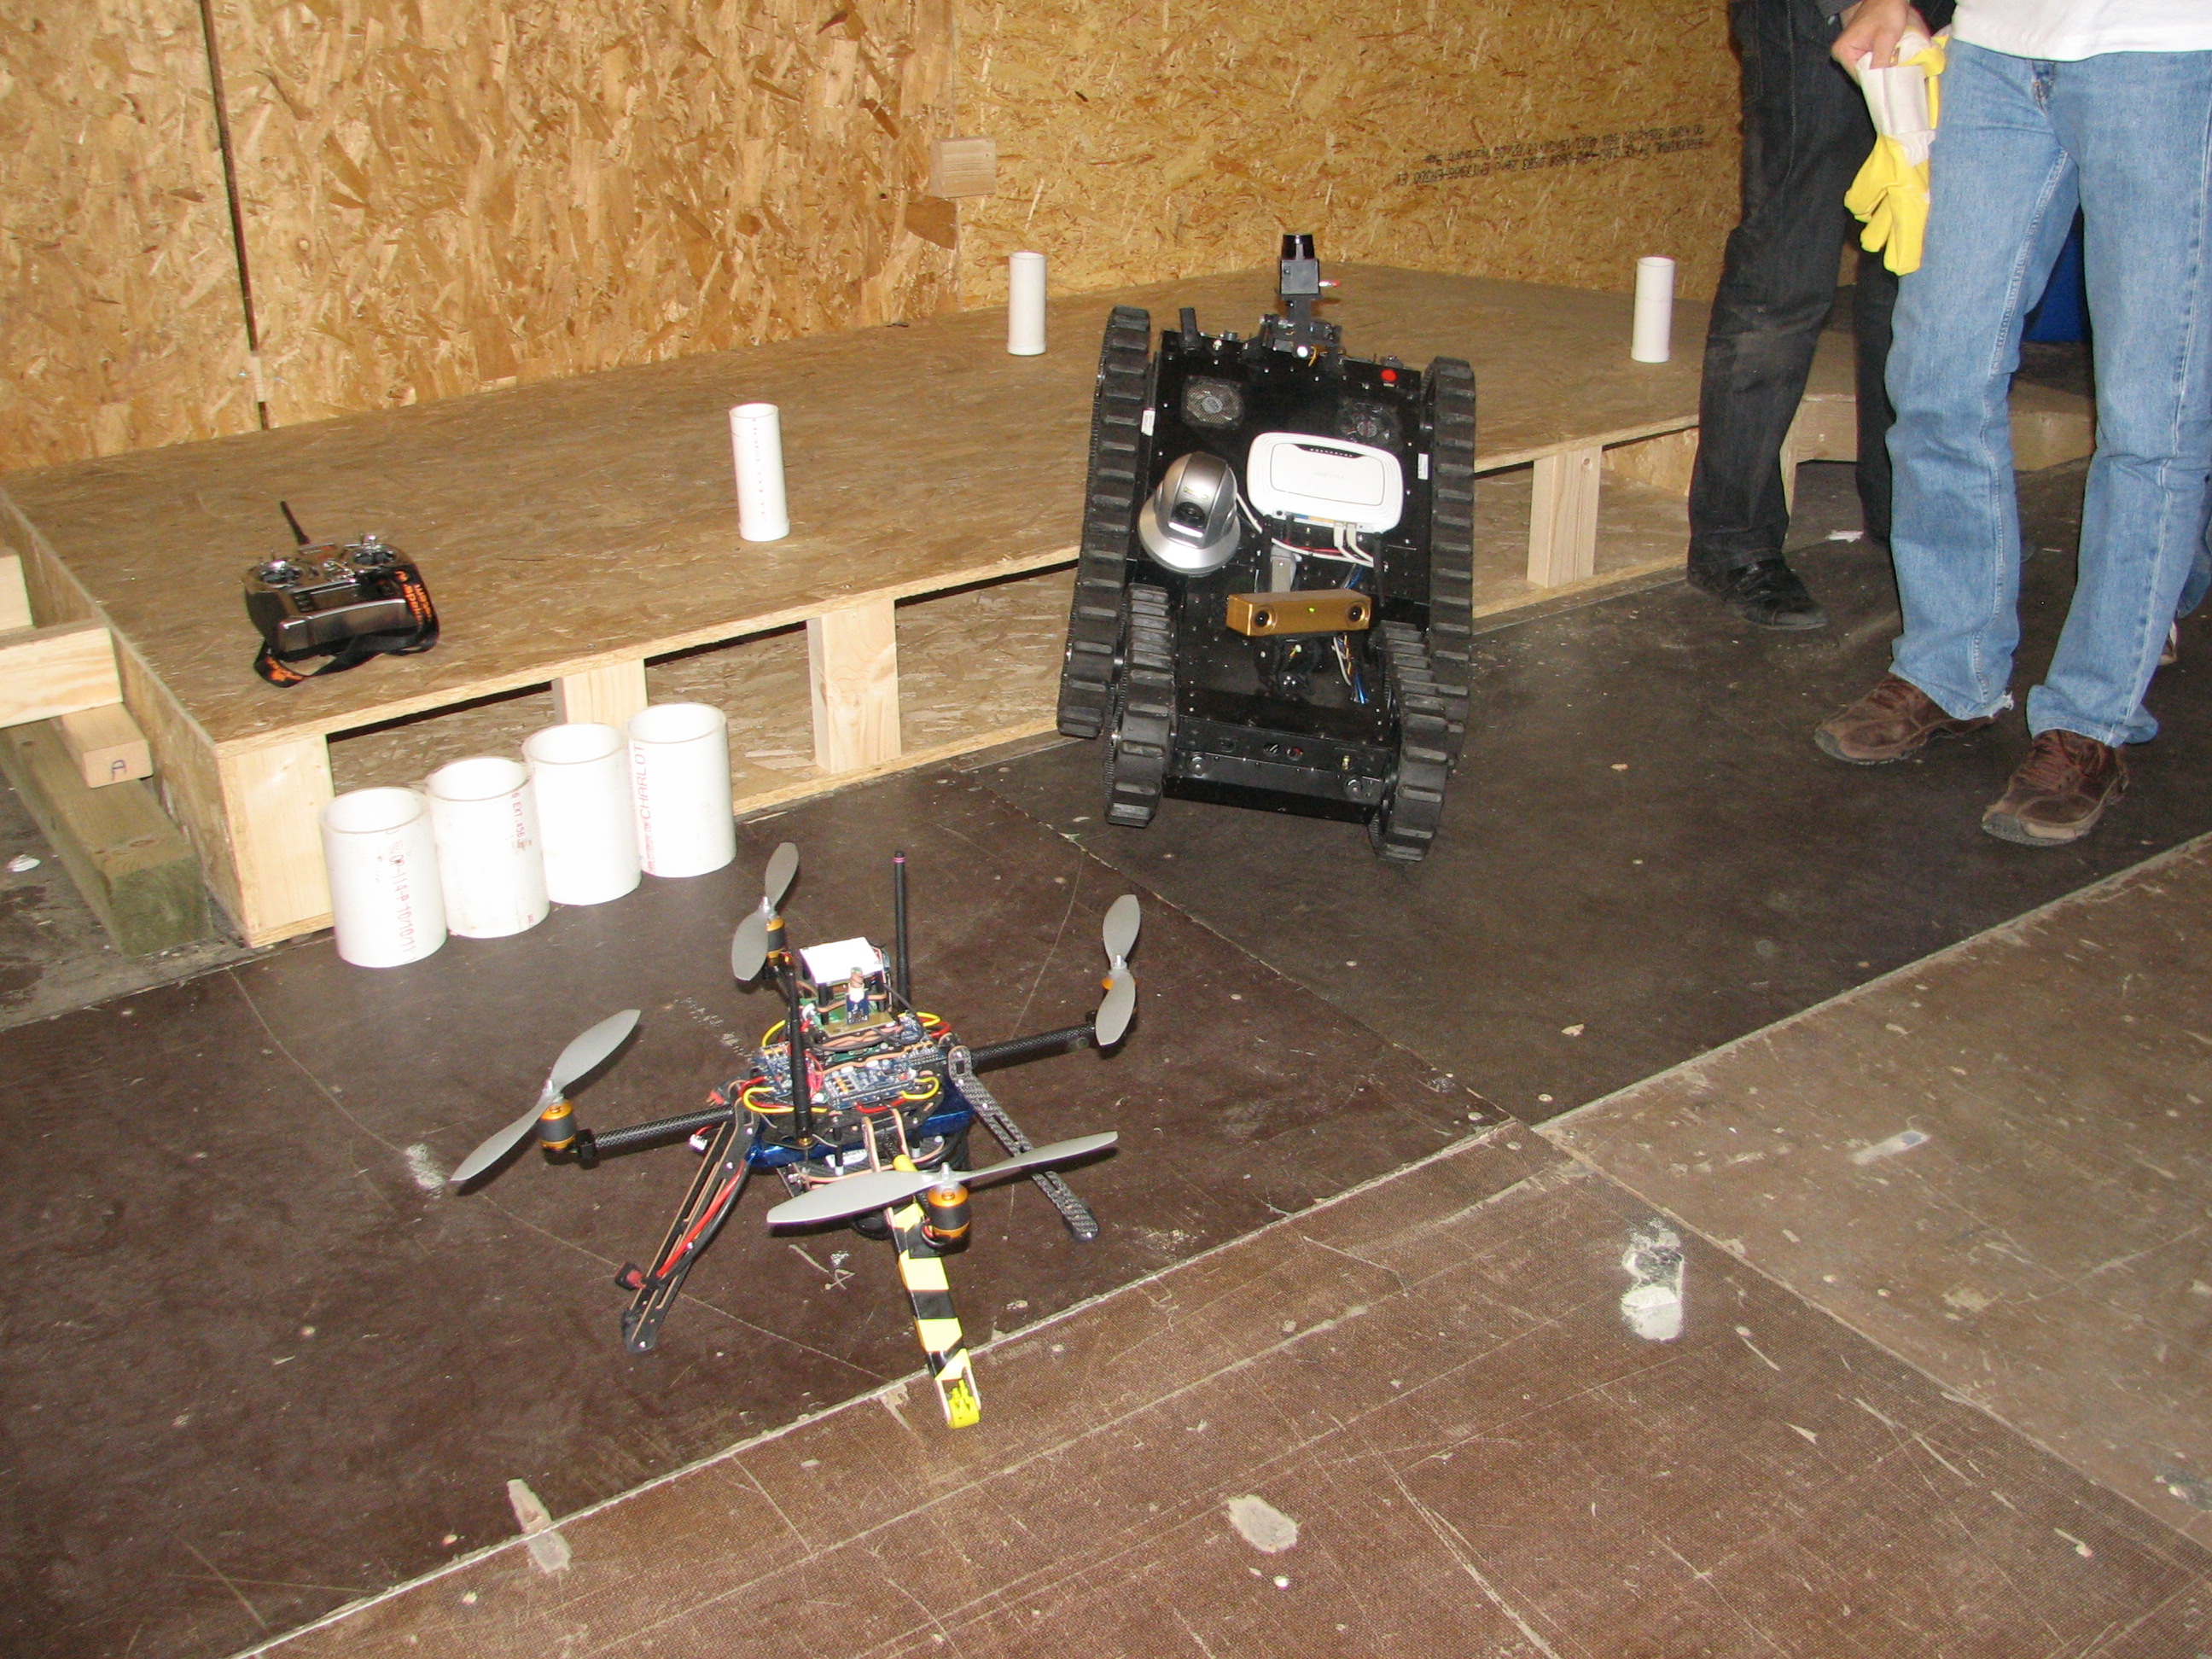  RAPOSA-NG and a quadcopter in Robocup 2013